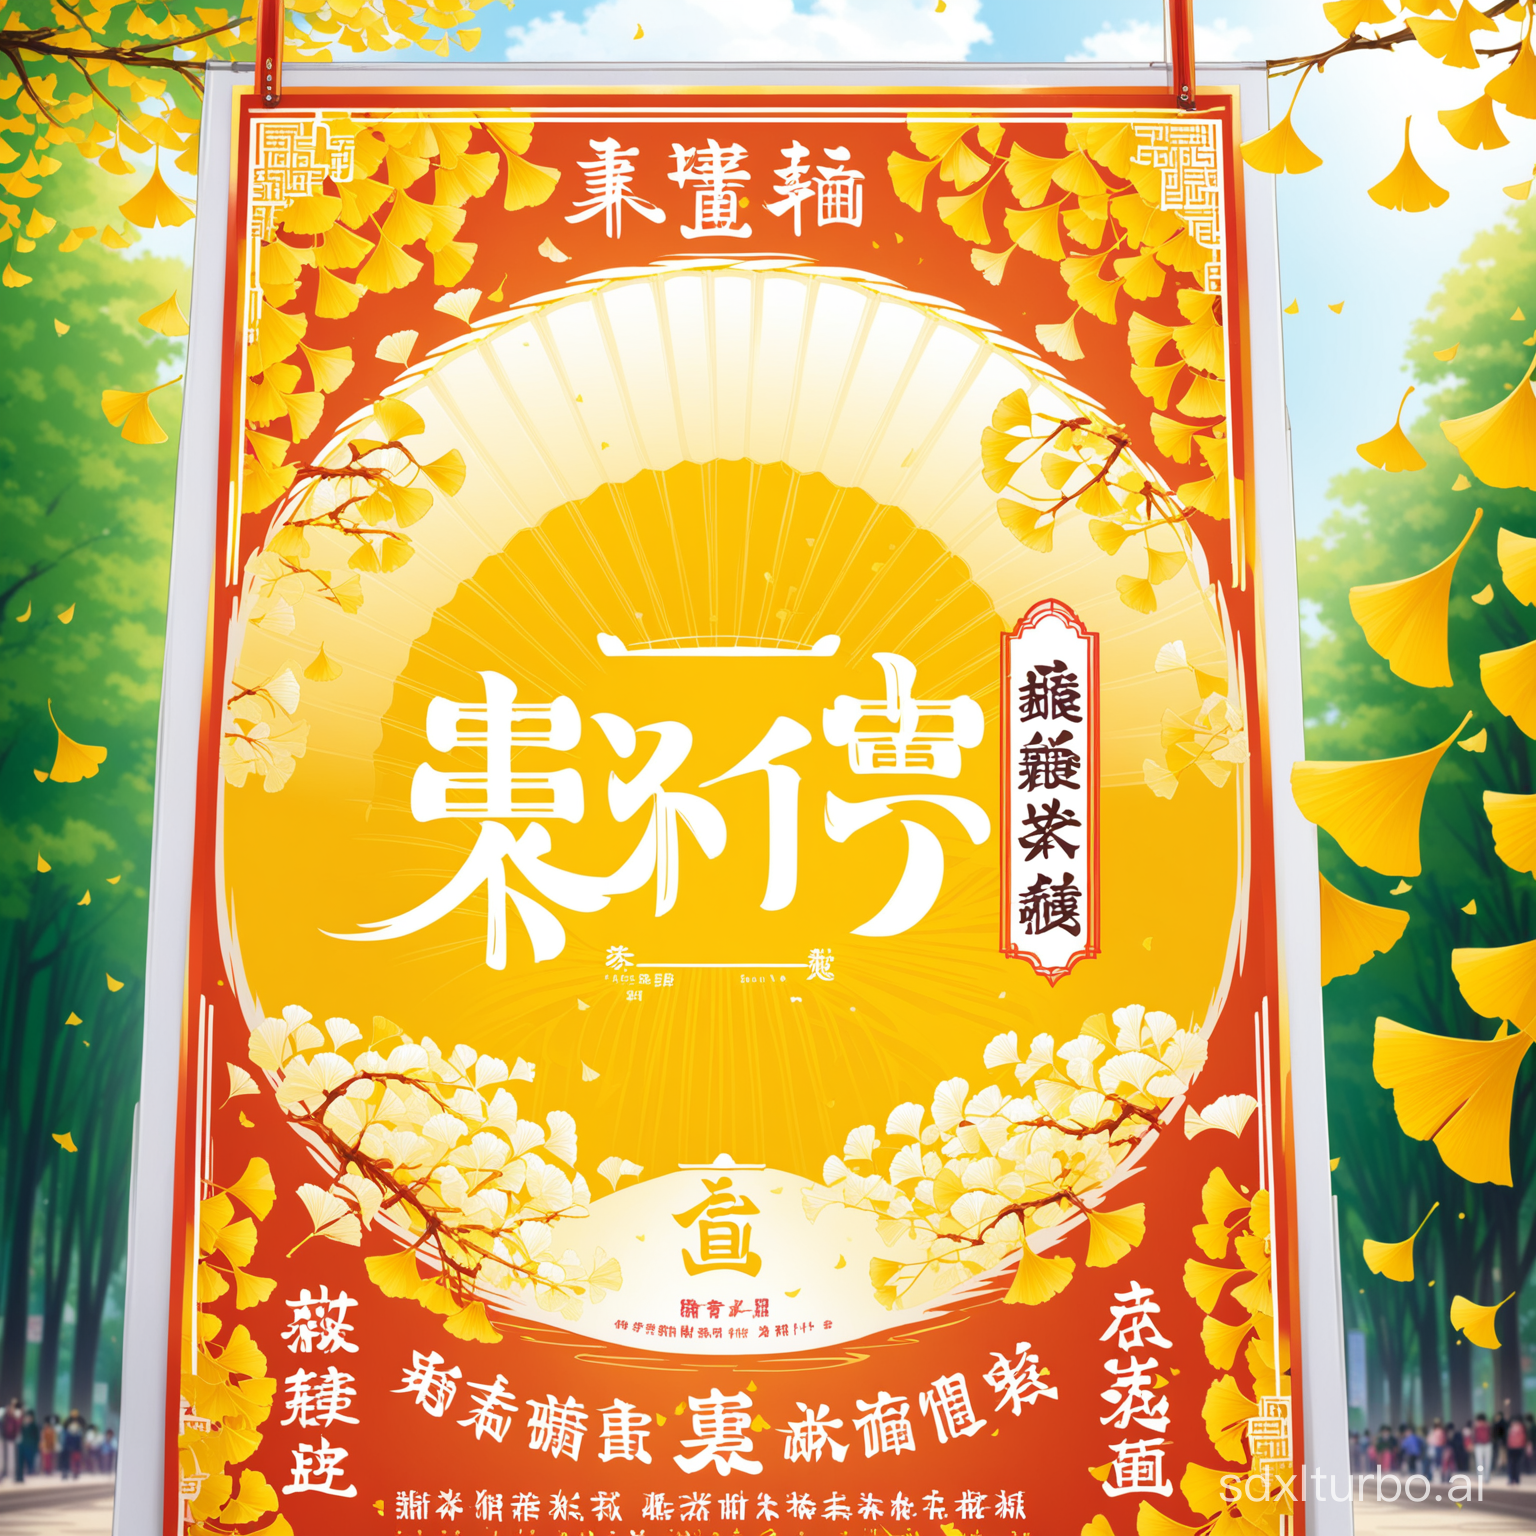 Student Festival poster with a few ginkgo biloba elements,and print 学生节in the middle